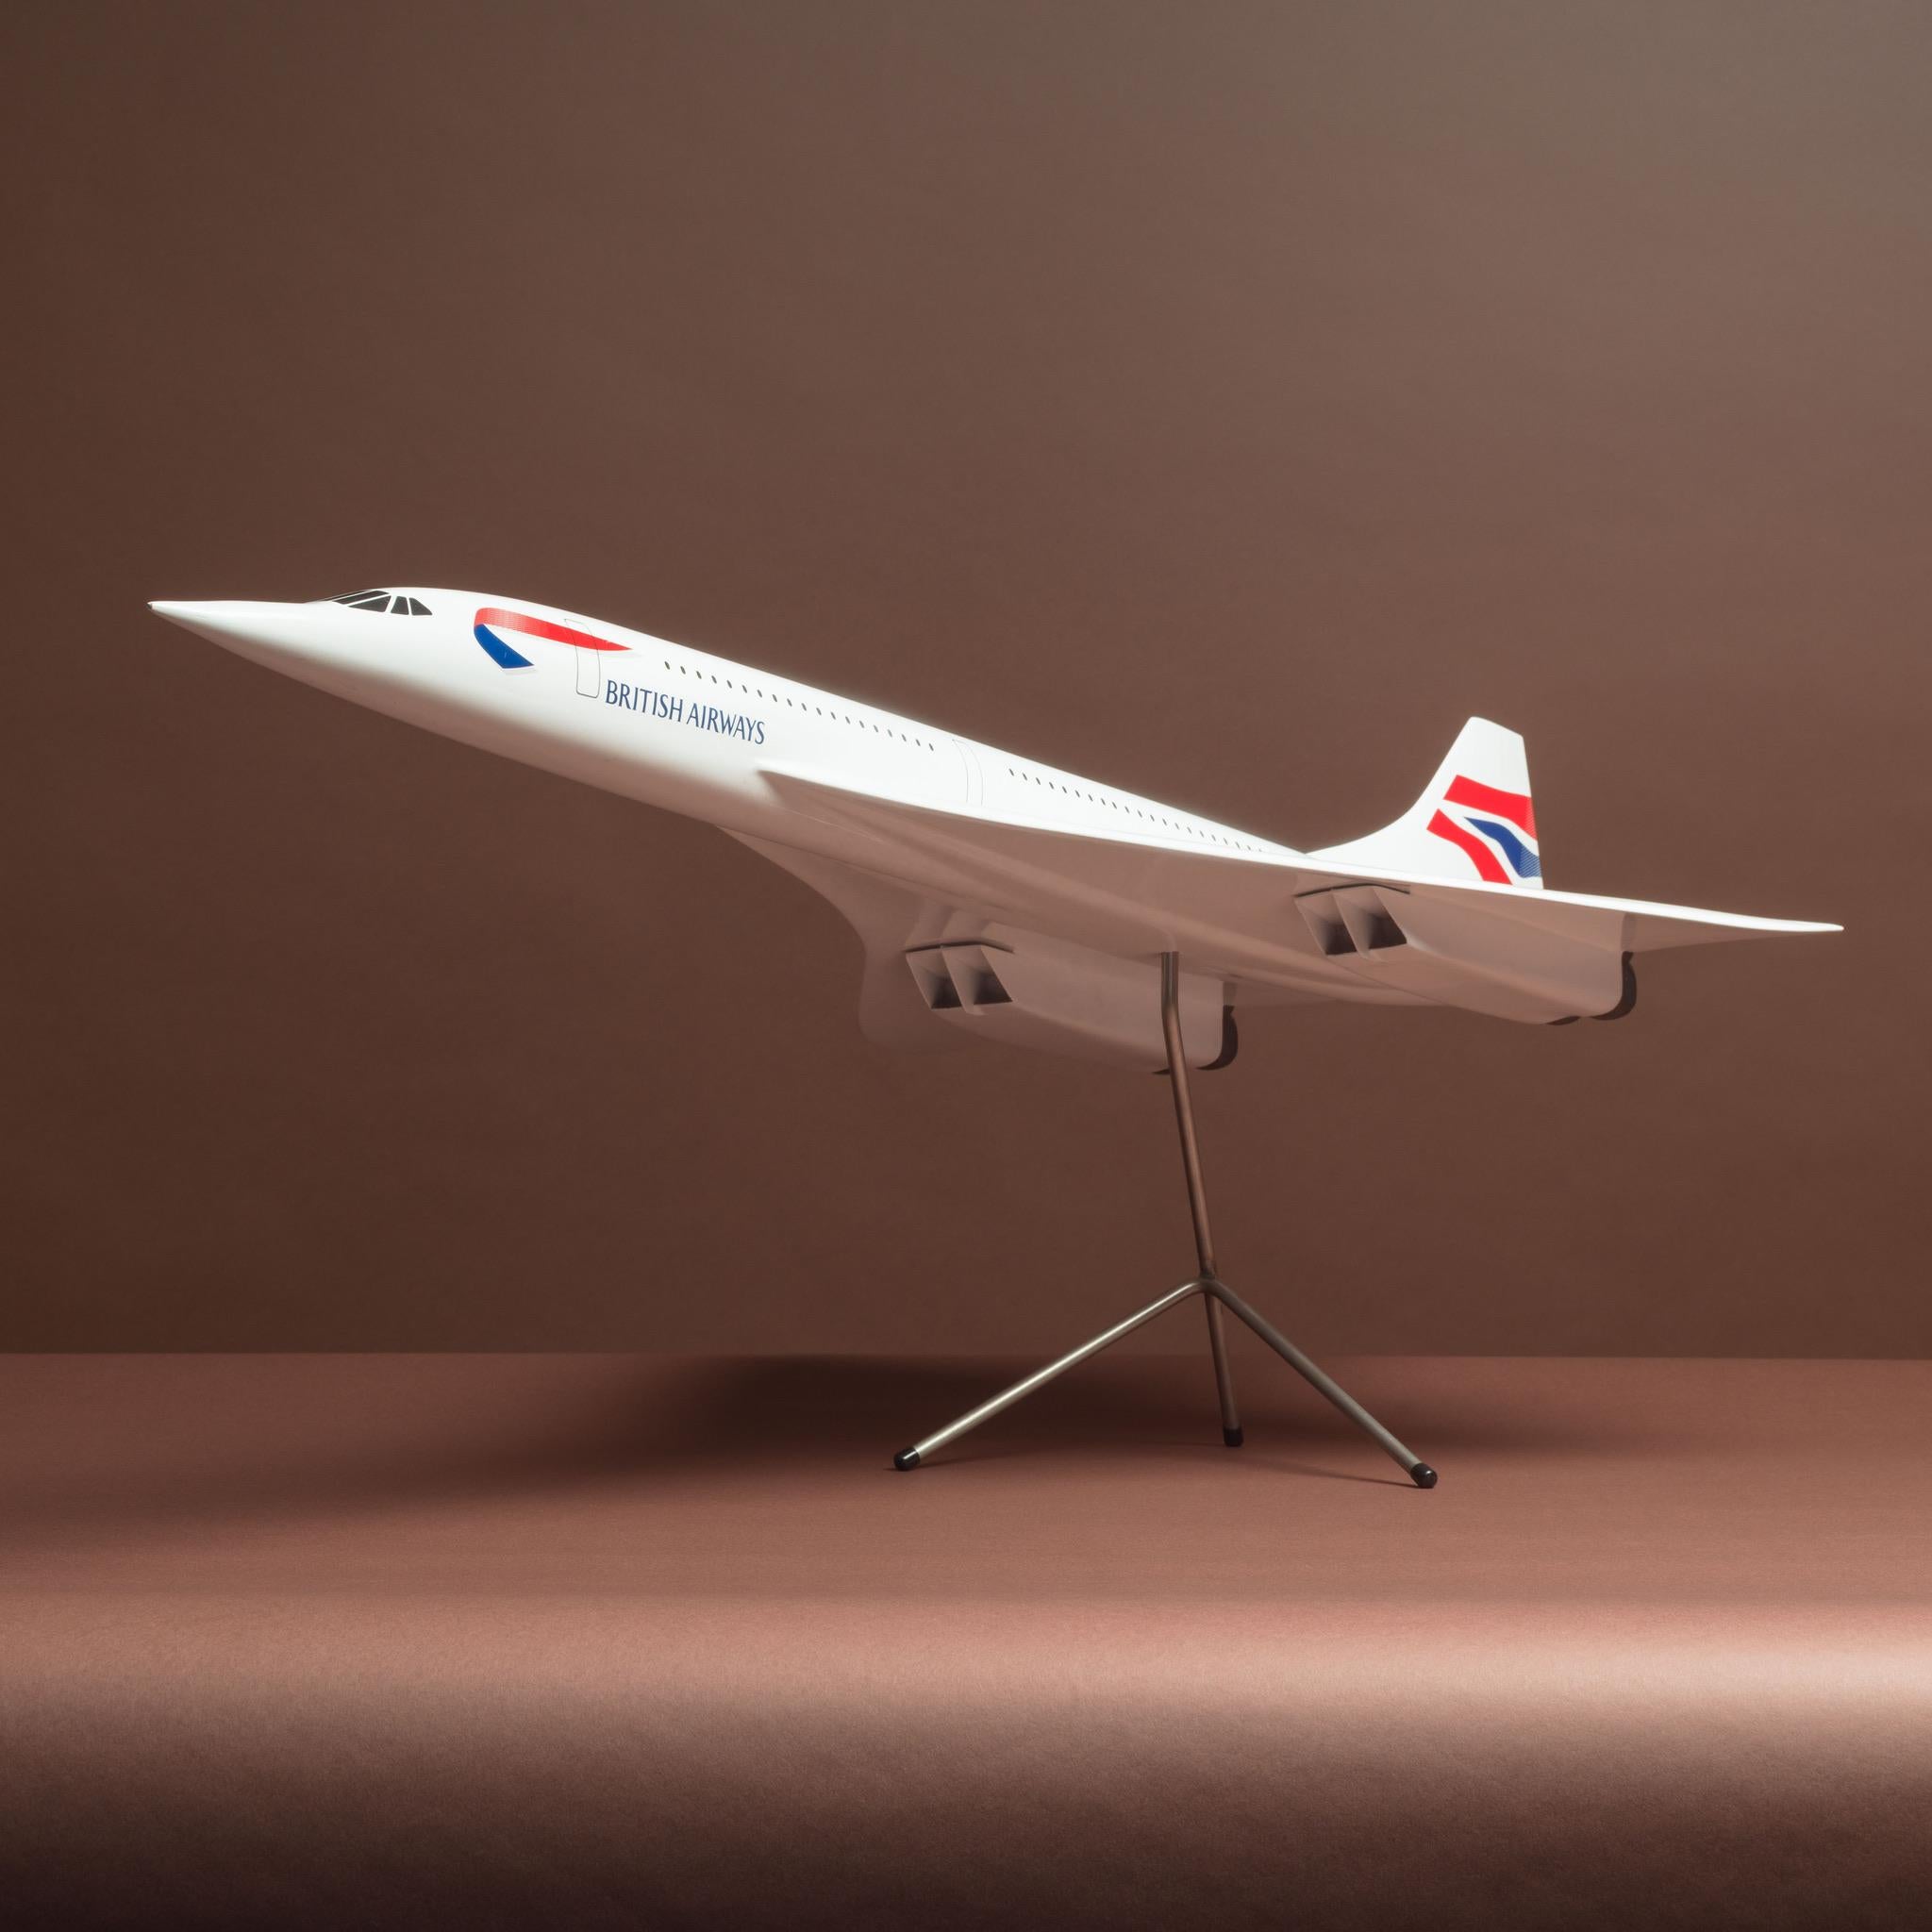 A wonderful quality fiberglass and resin composite 1:50 scale promotional model of a Concorde jet airplane in BA’s final livery design for the supersonic aircraft known as the 'Chatham' livery. On original chrome-plated stand; circa 2001.

The famed